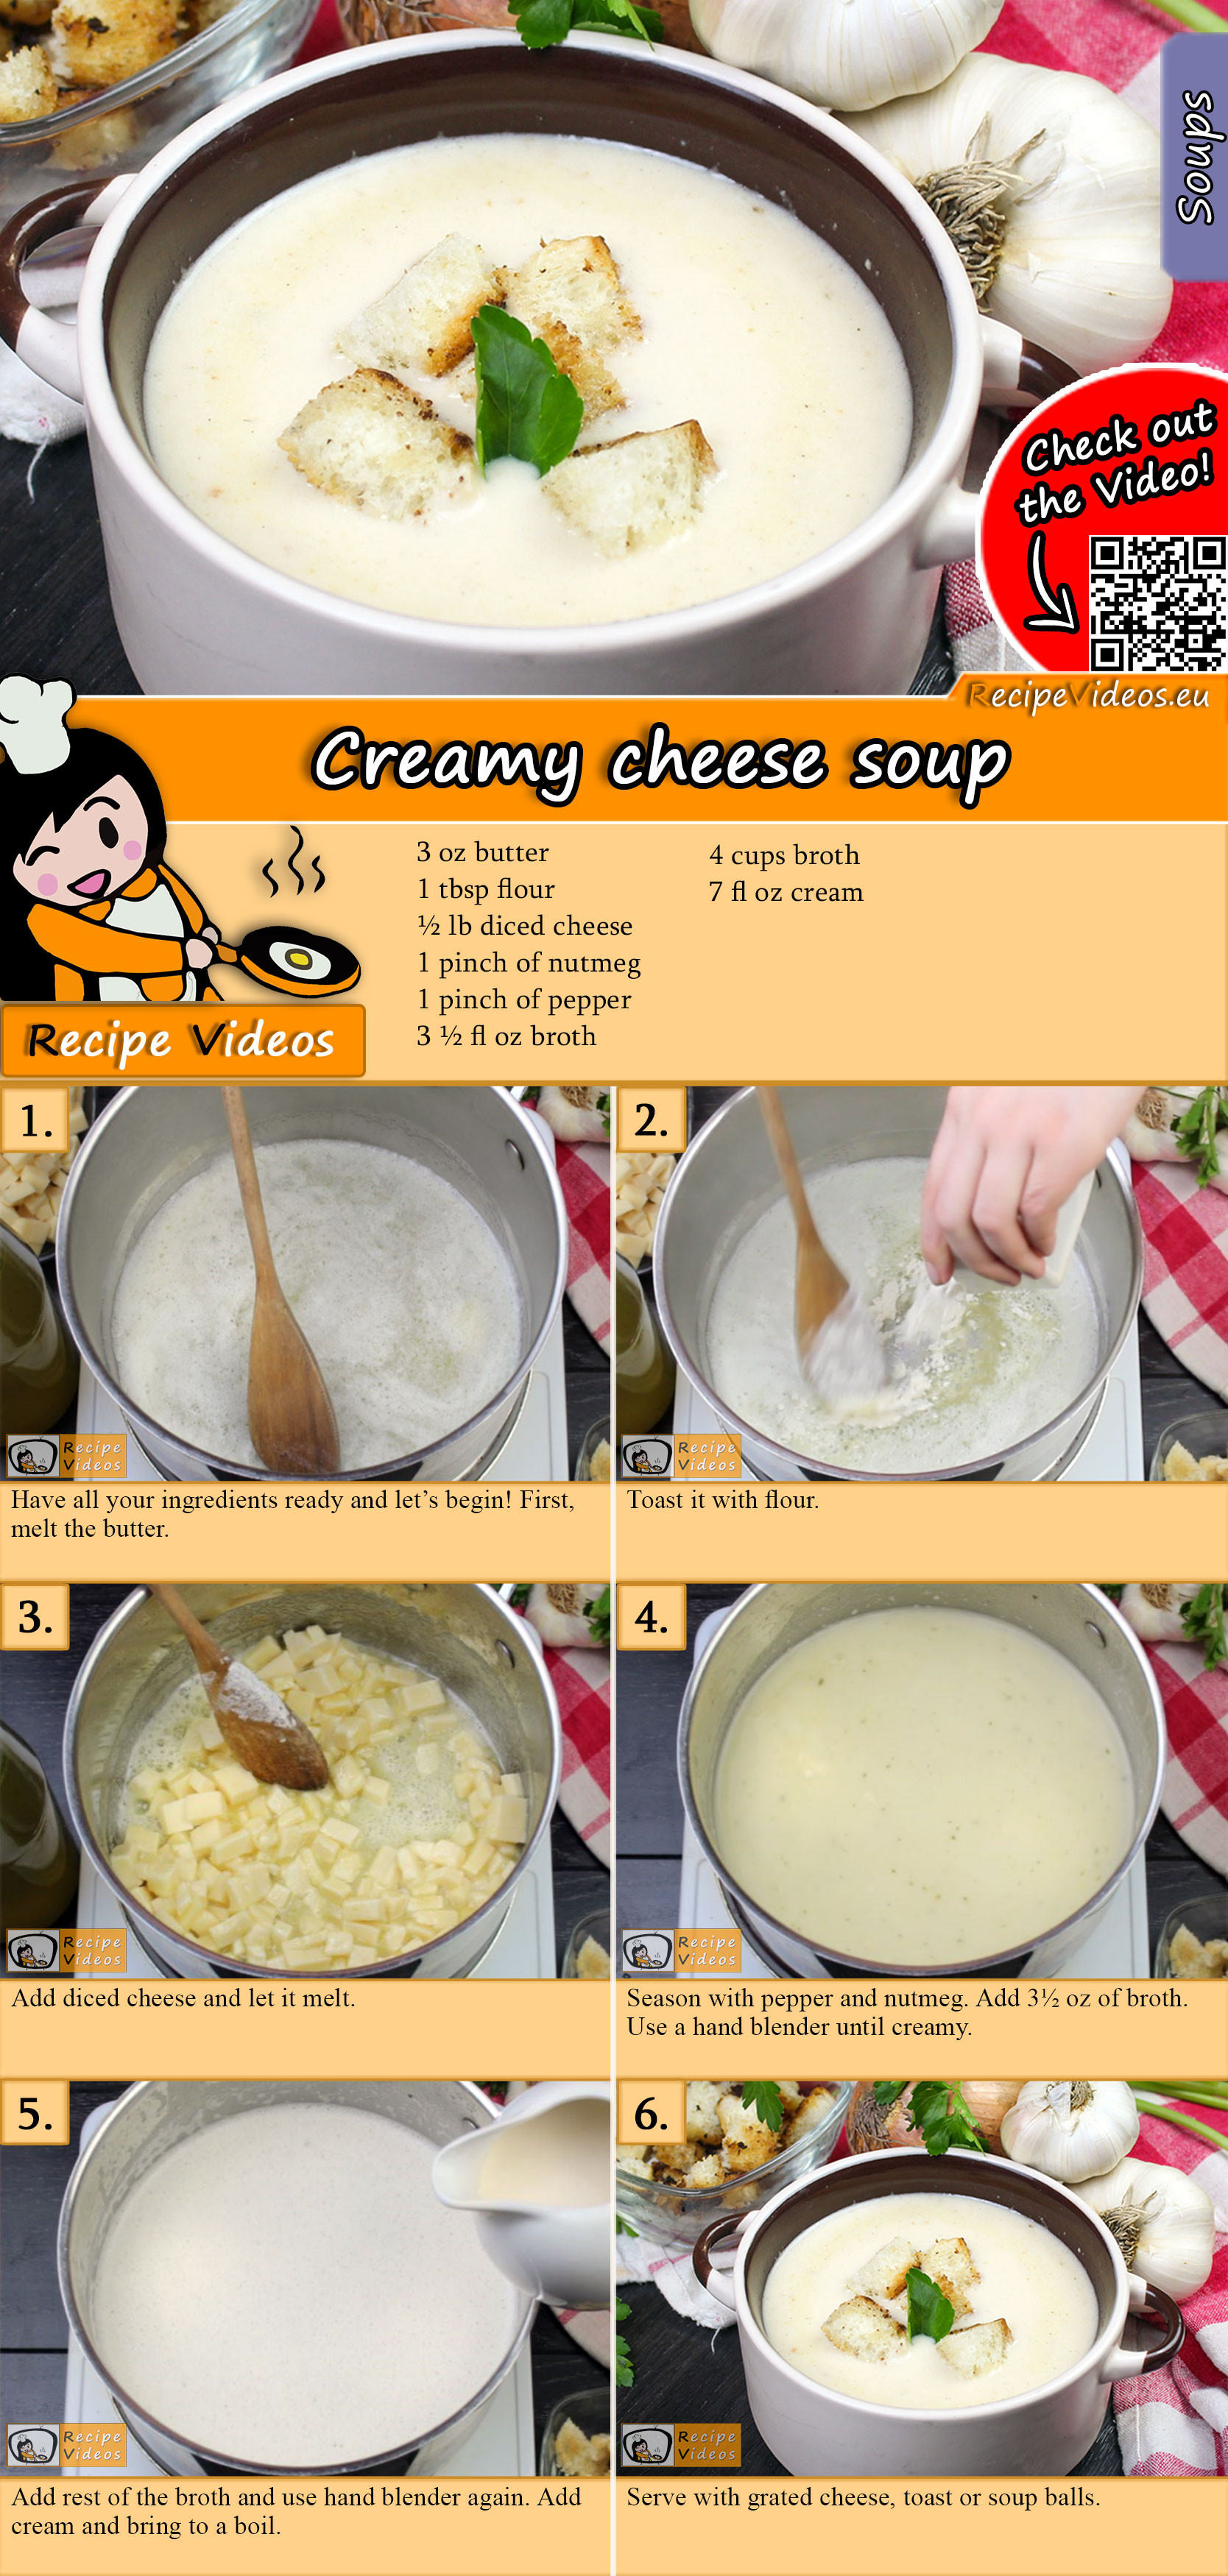 Creamy cheese soup recipe with video